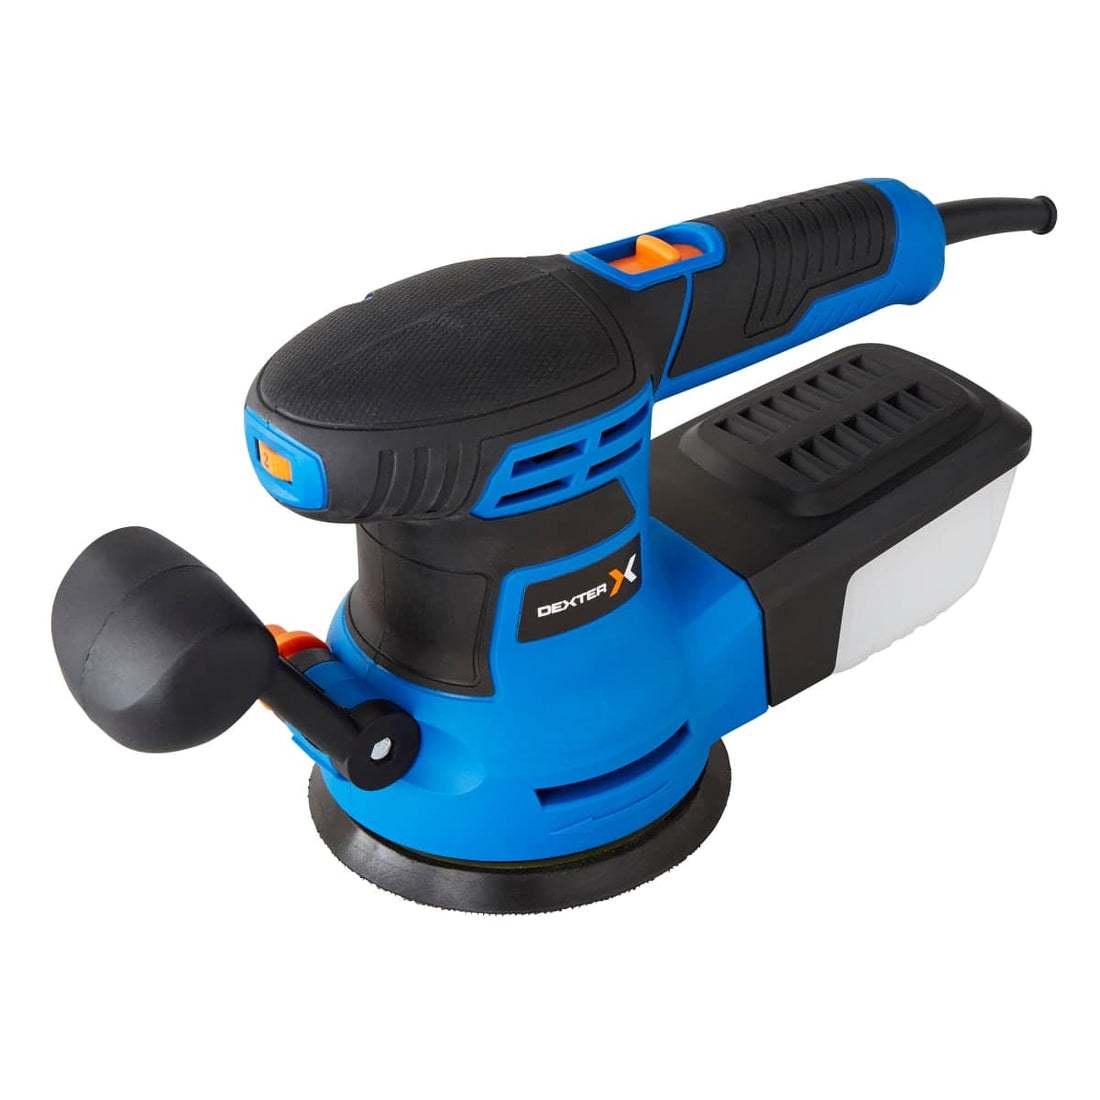 DEXTER 350W ROTO-ORBITAL SANDER 125MM BACKING PAD WITH DUST EXTRACTION SYSTEM - best price from Maltashopper.com BR400730124